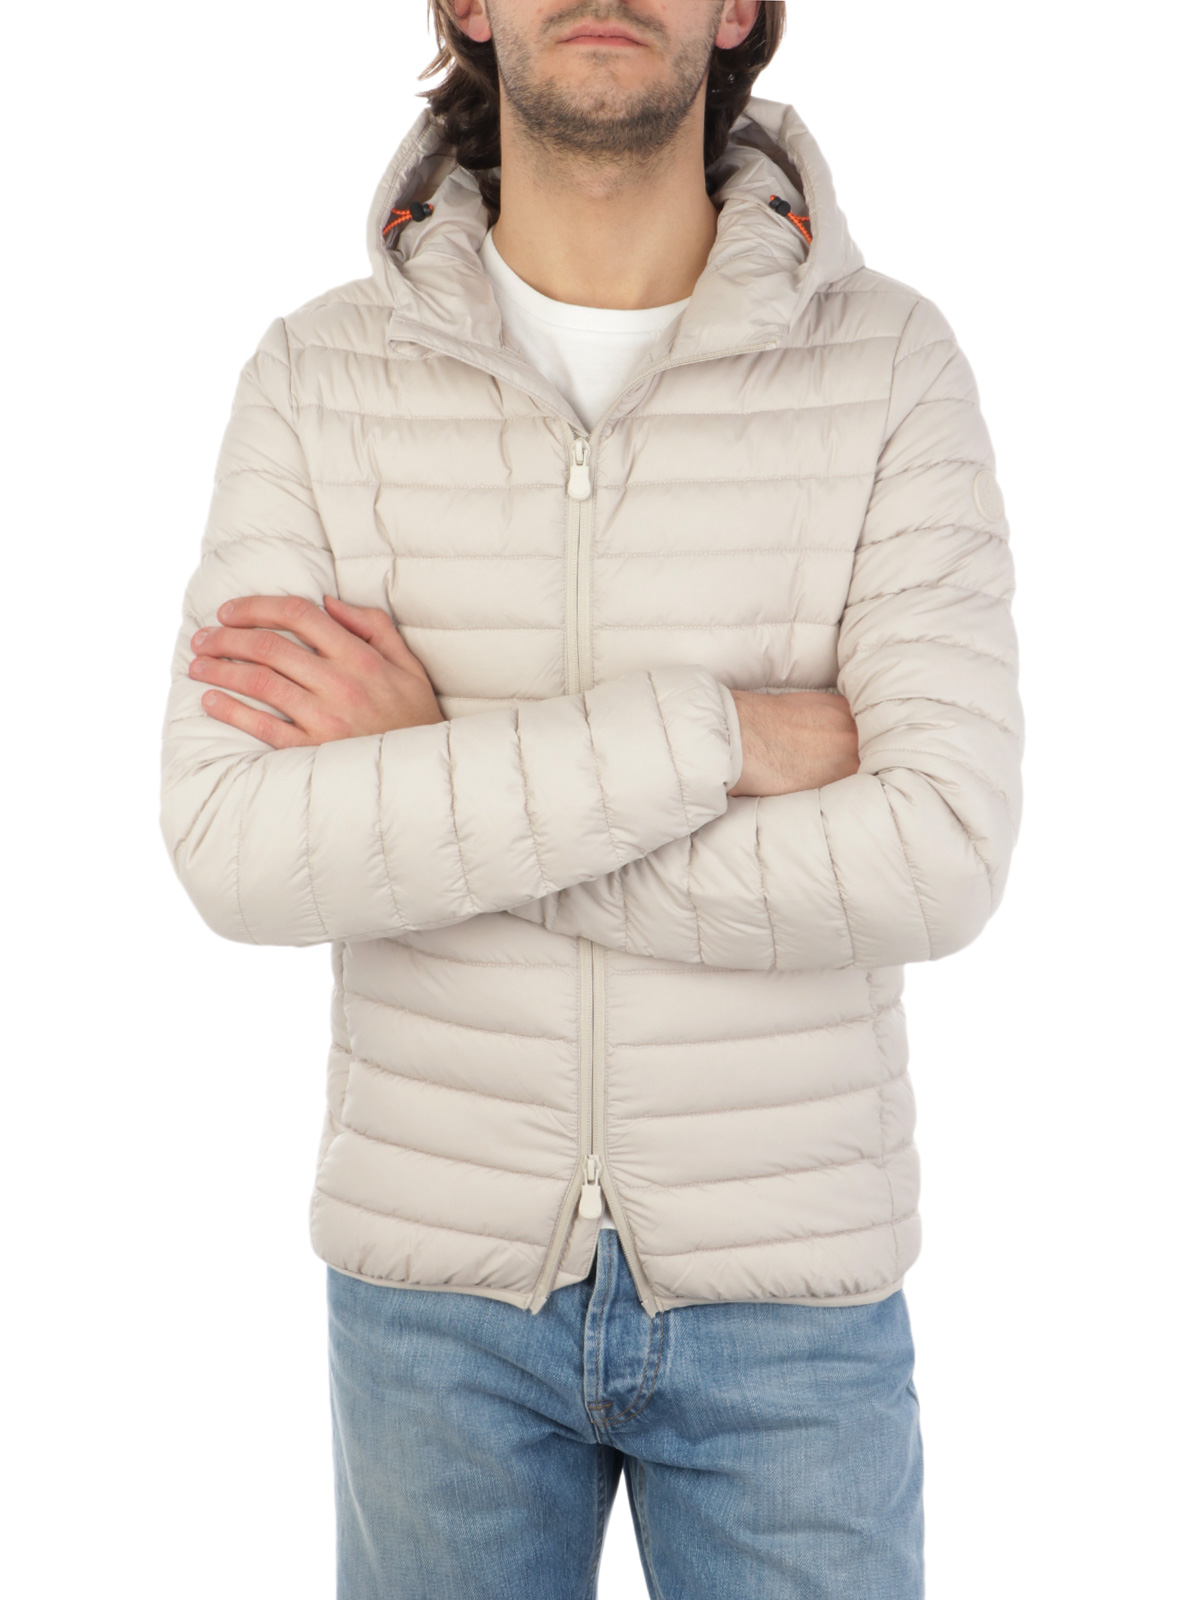 SAVE THE DUCK Men's Luke Quilted Jacket Cream | D39710MMITO16 | Botta ...